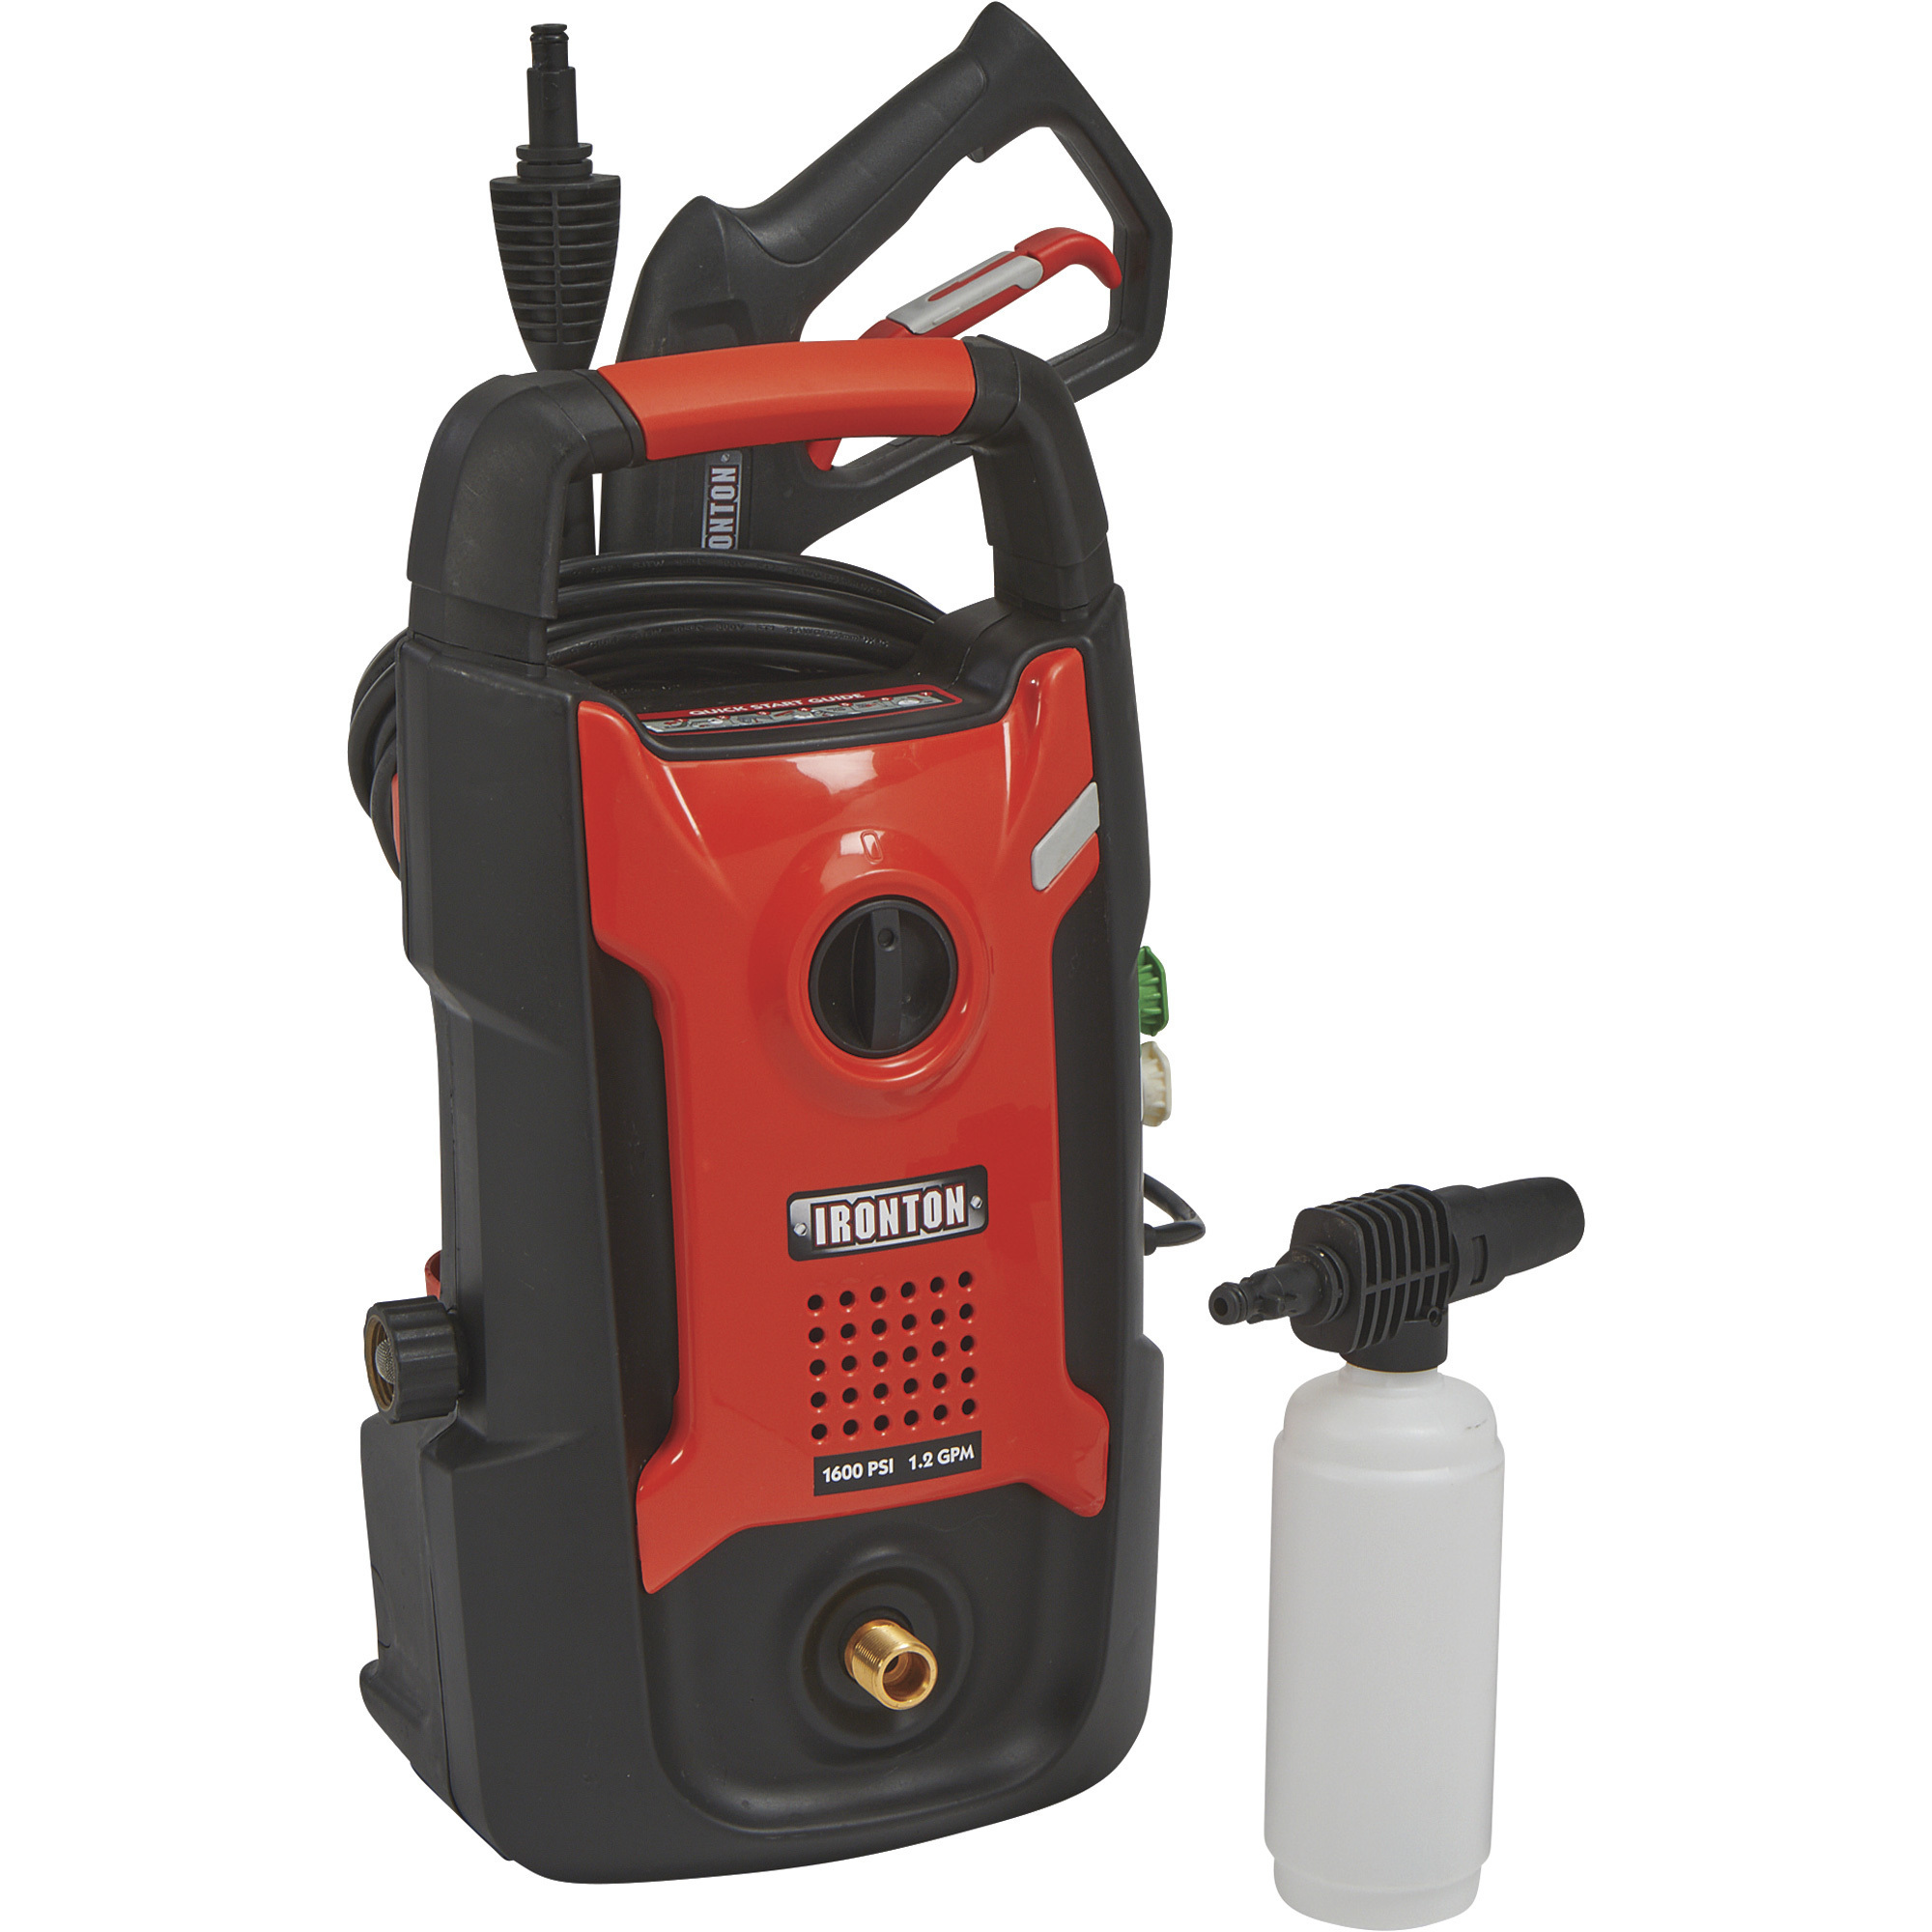 Ironton Electric Cold Water Pressure Washer â 1600 PSI, 1.2 GPM